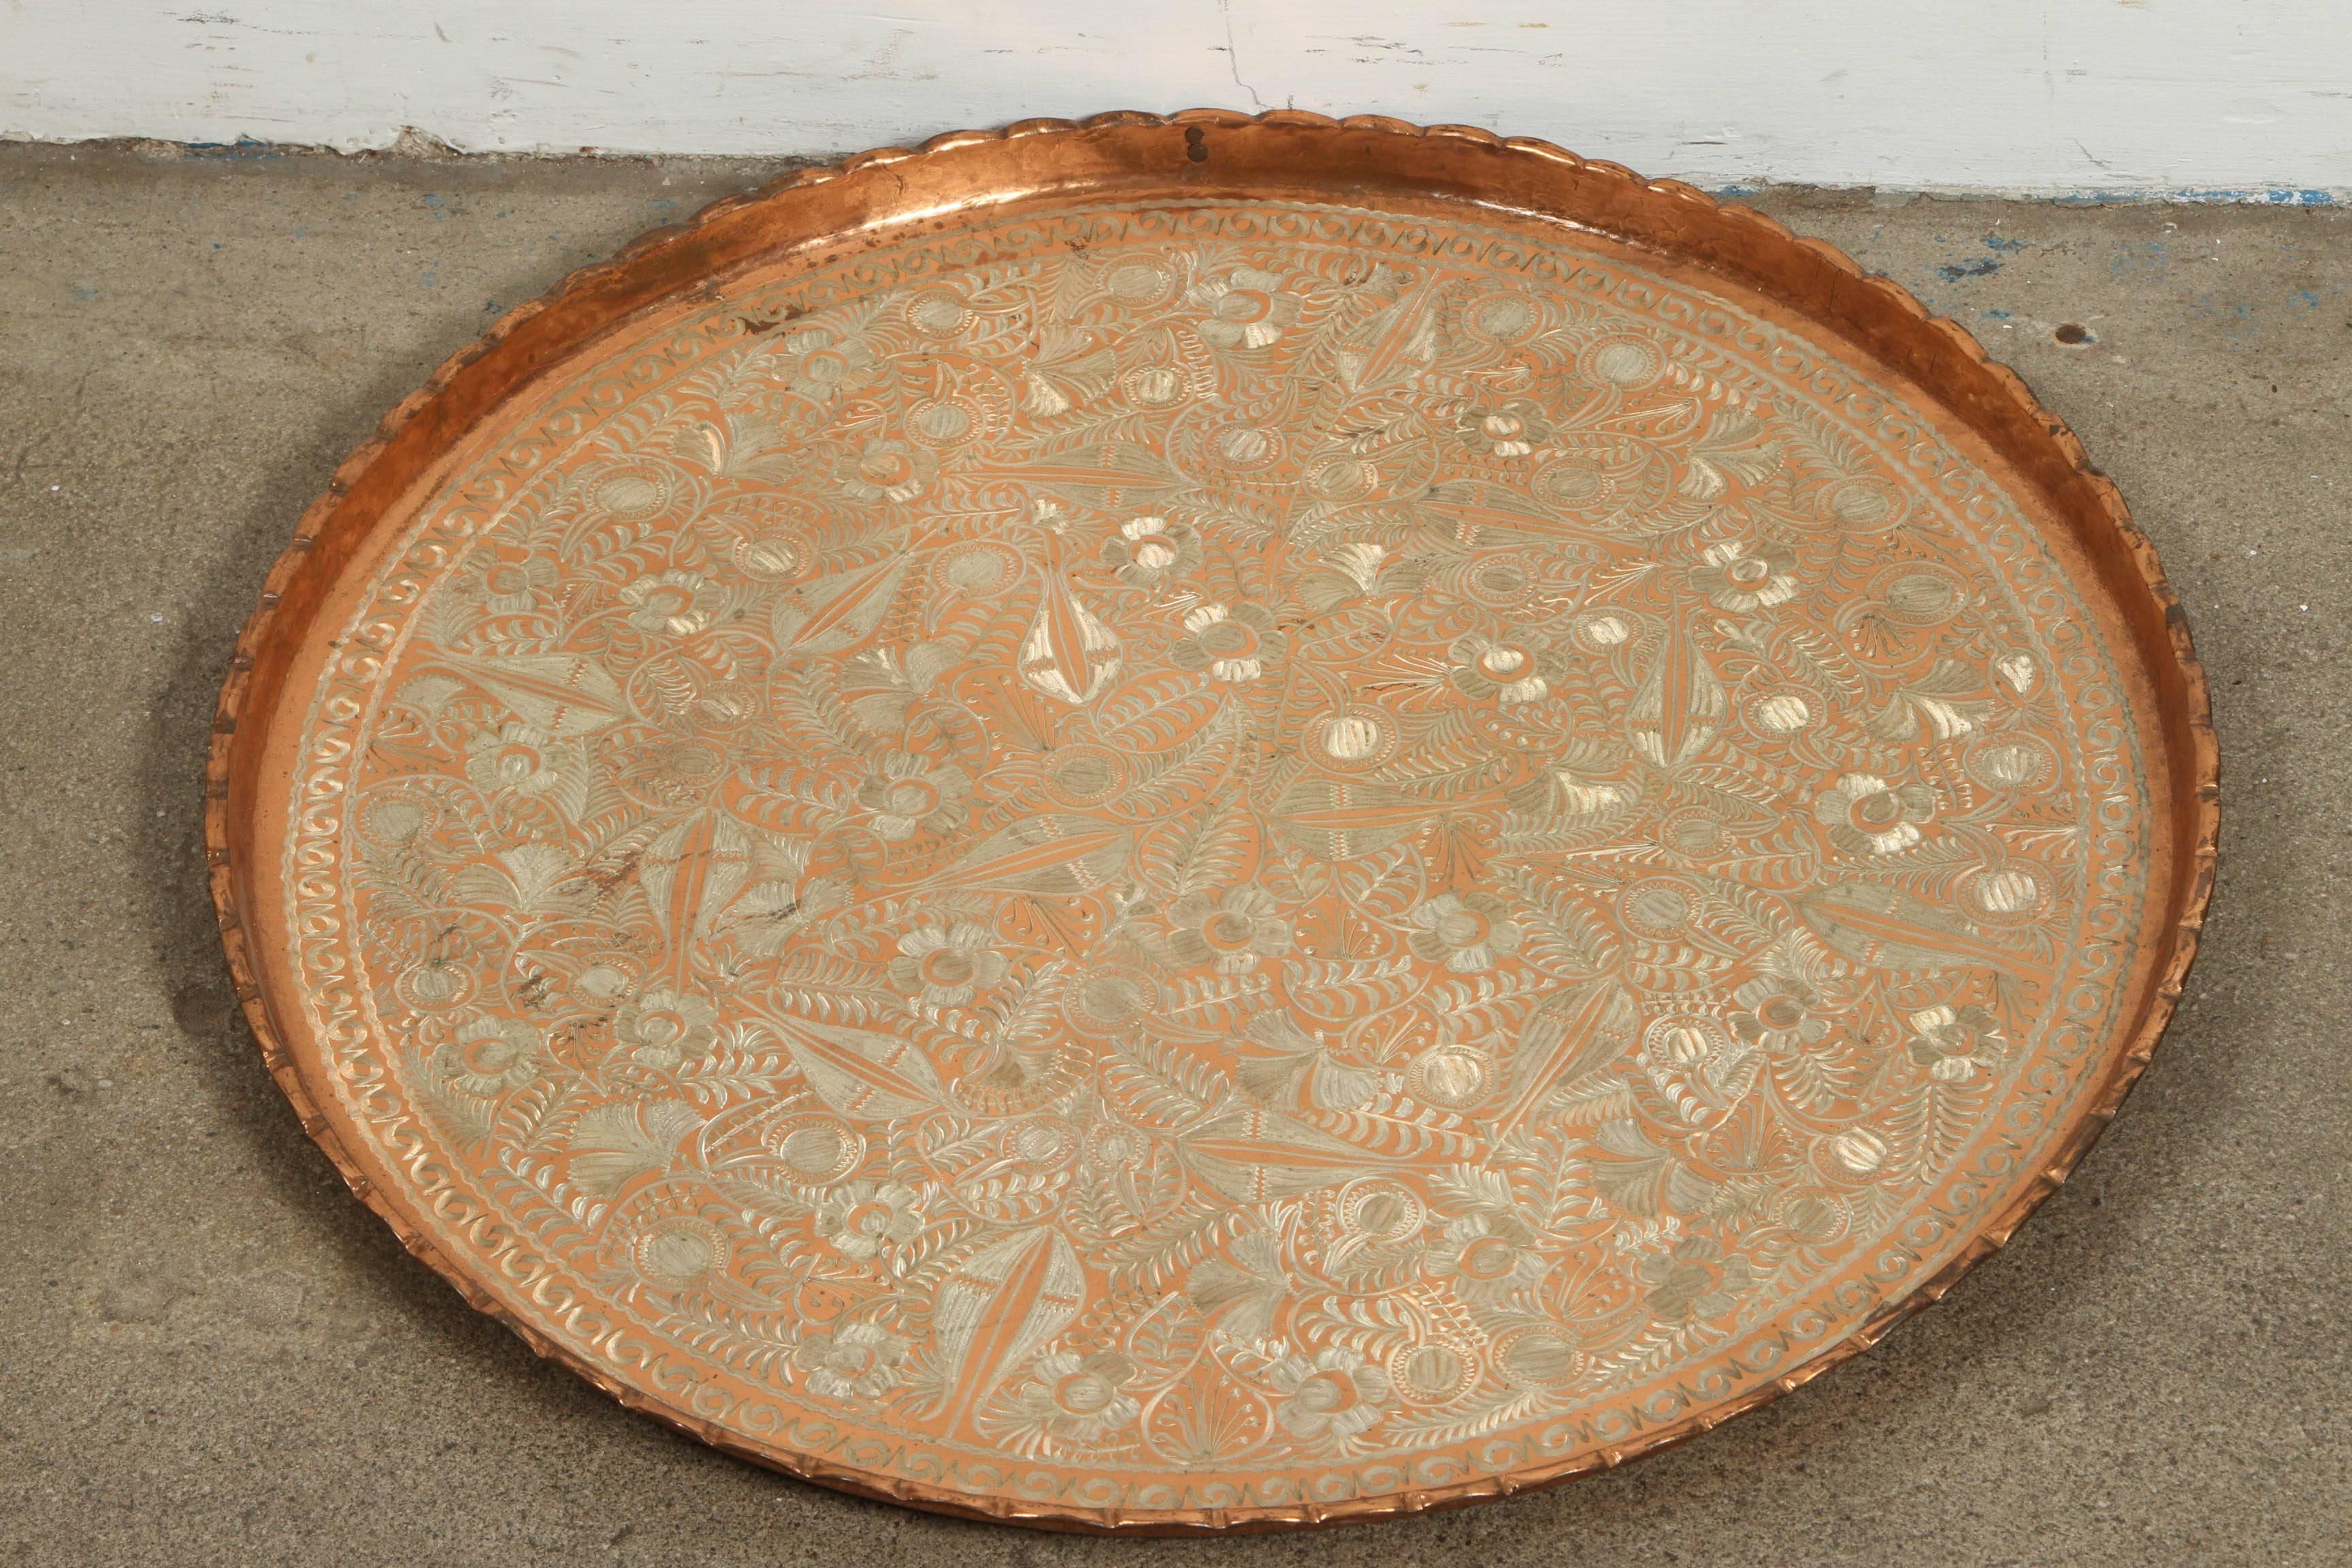 Large Turkish hanging copper platter.
Nicely and heavily hand-hammered Middle Eastern tray and etched with floral designs in silver color.
Hang it on the wall or use it for a brass serving tray.
Signed by the manufacturer and numbered. 
Nurcan,